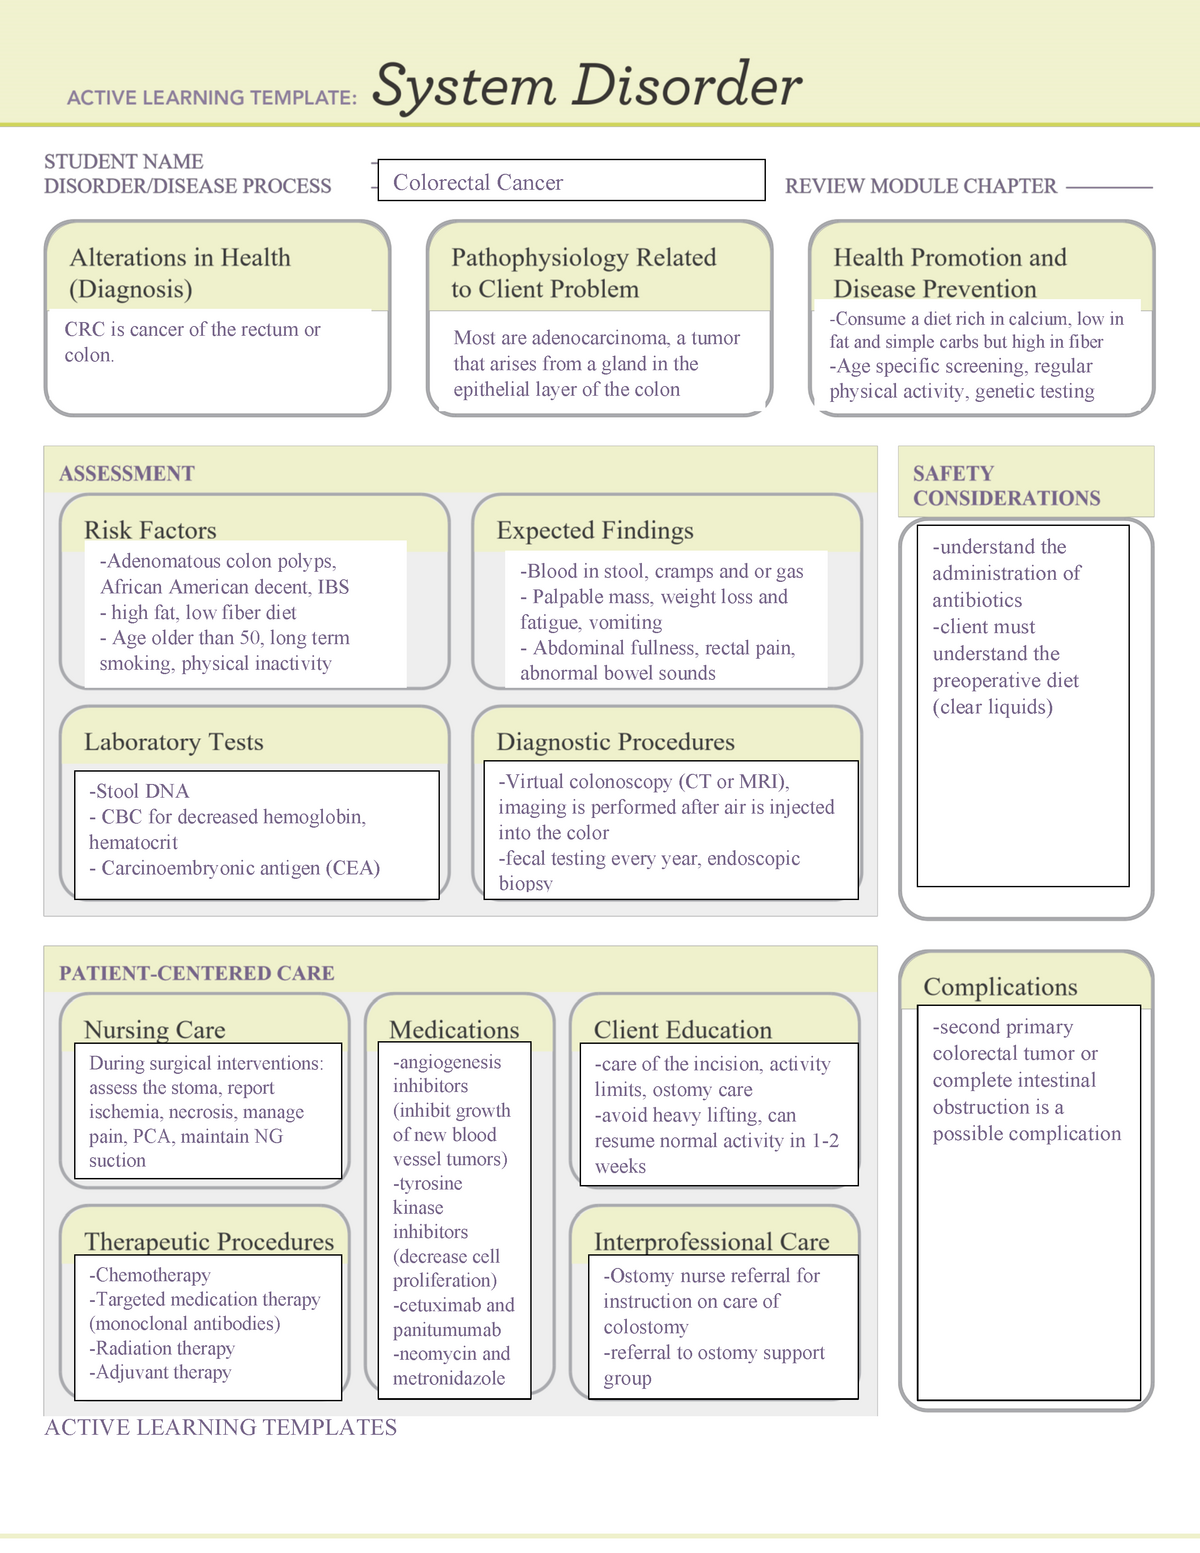 active-learning-from-ati-practice-a-and-b-active-learning-templates